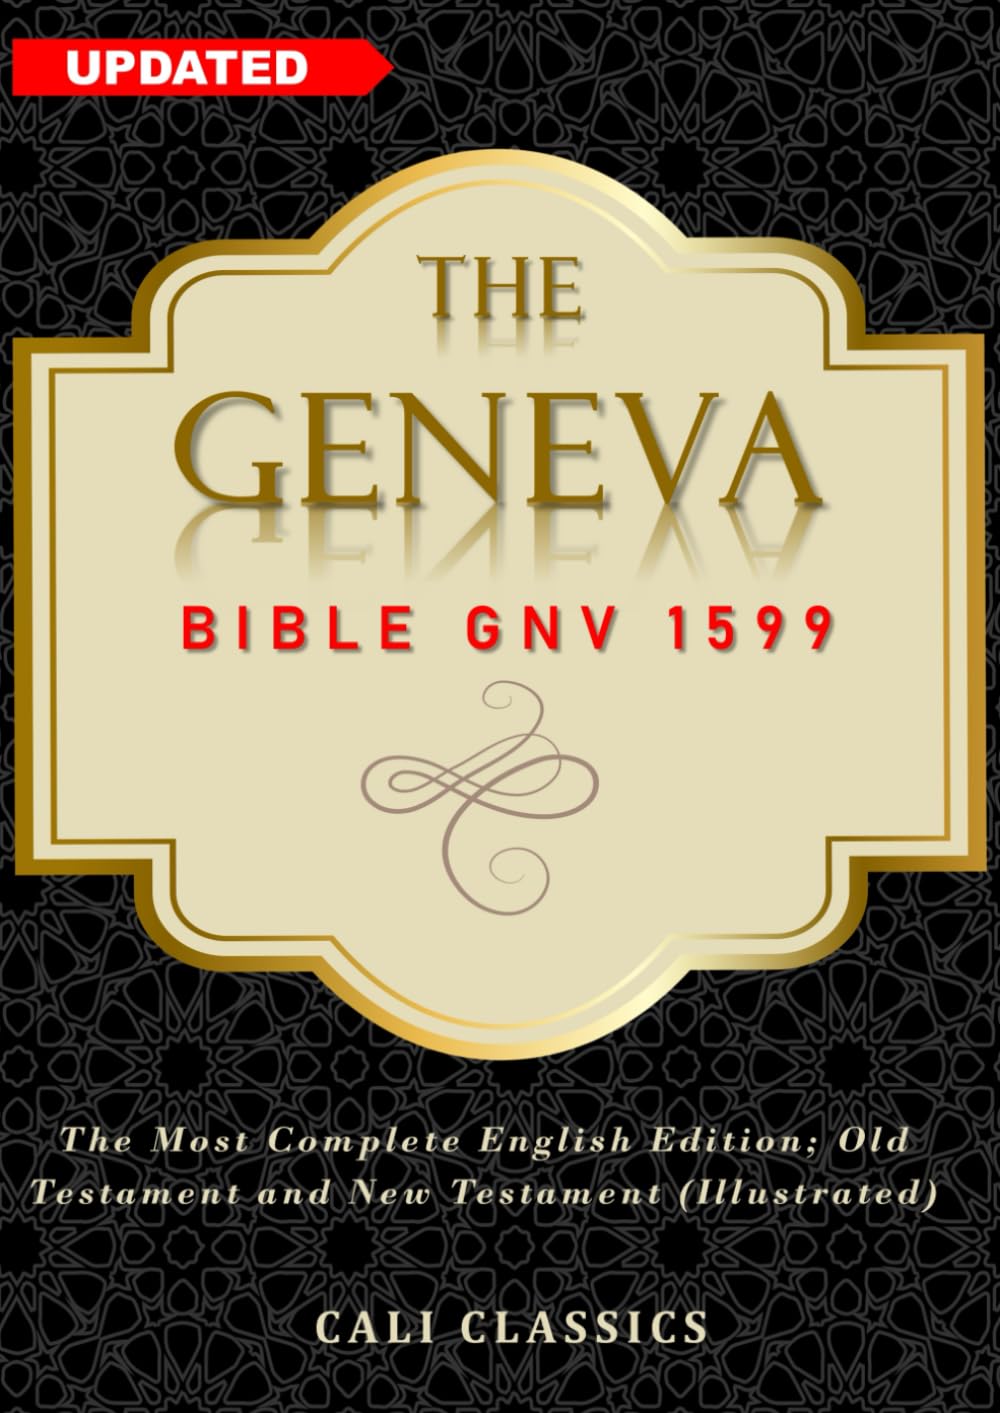 The Geneva Bible GNV 1599 of The Protestant Reformation: The Most Complete English Edition; Old Testament and New Testament (Illustrated)